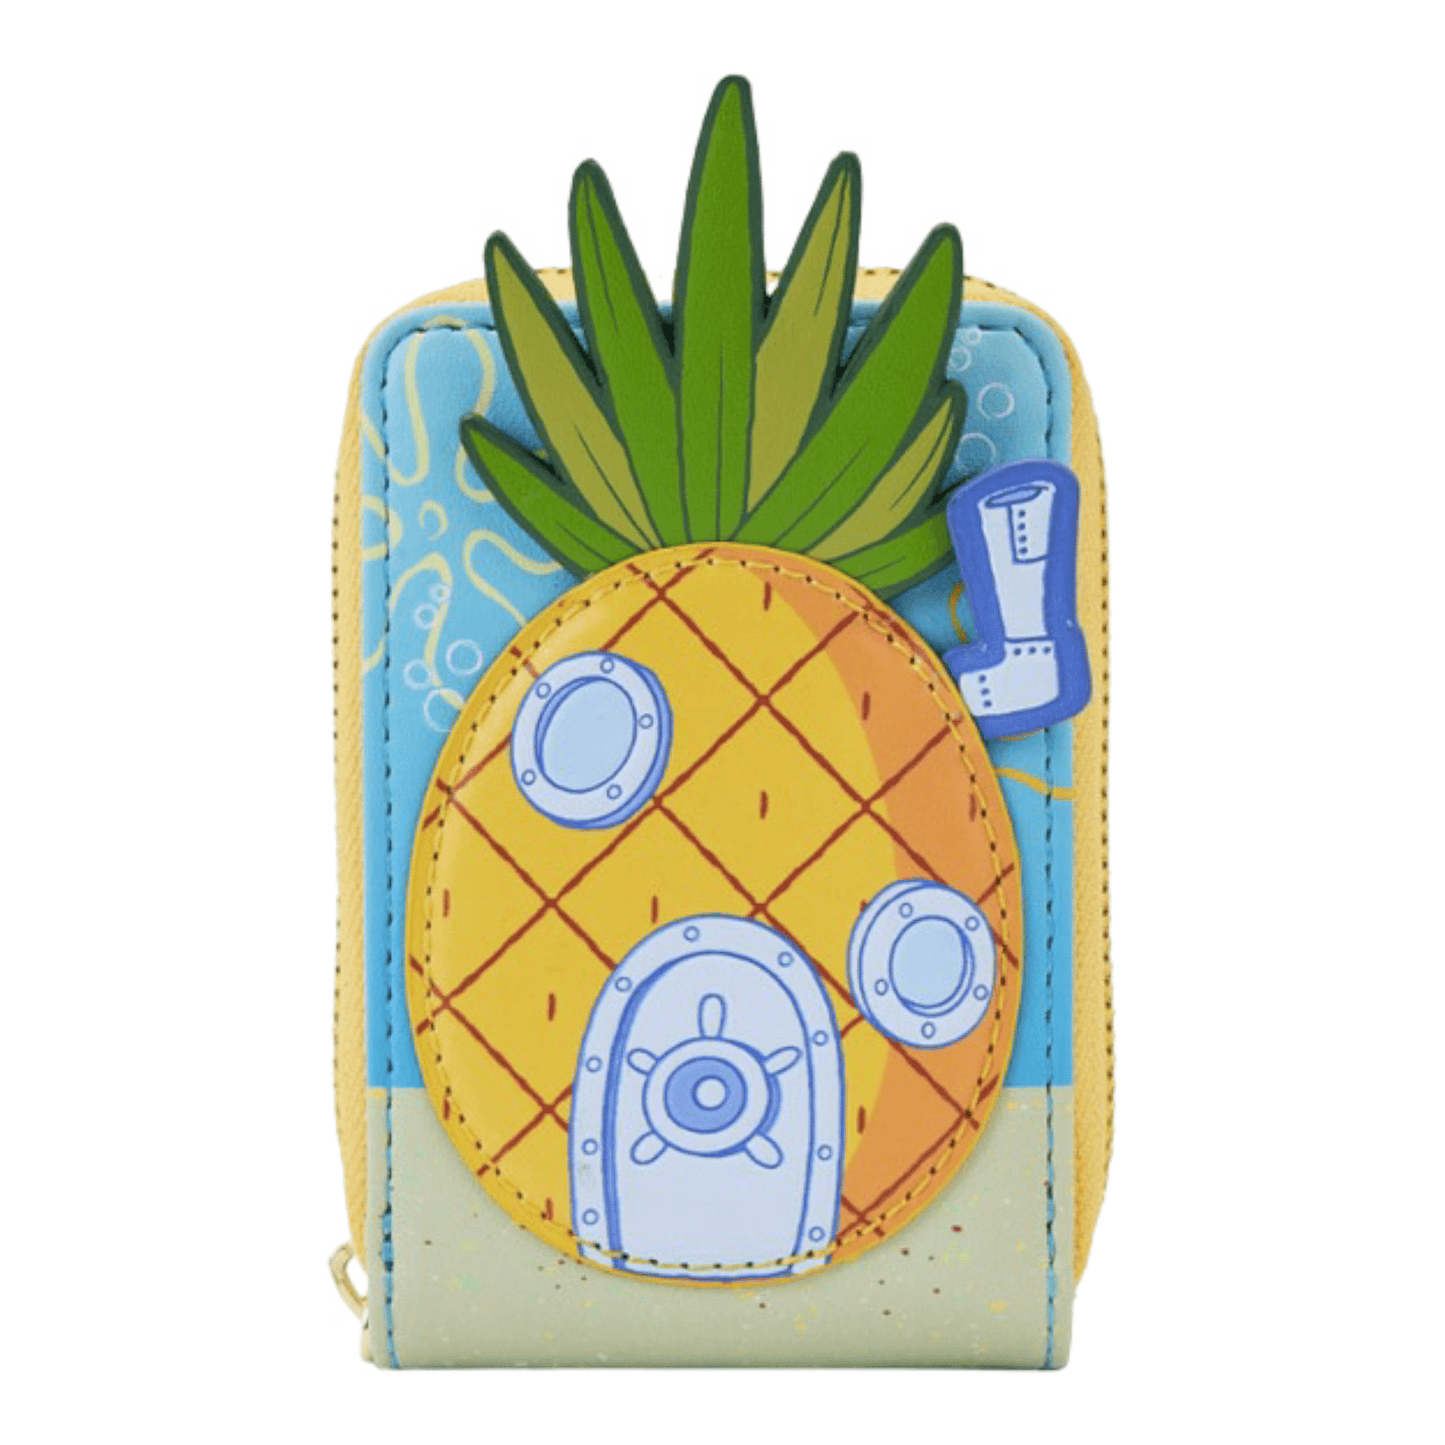 Portefeuille - Spongebob Squarepants Pineapple House - Nickelodeon - Loungefly J'M T Créa